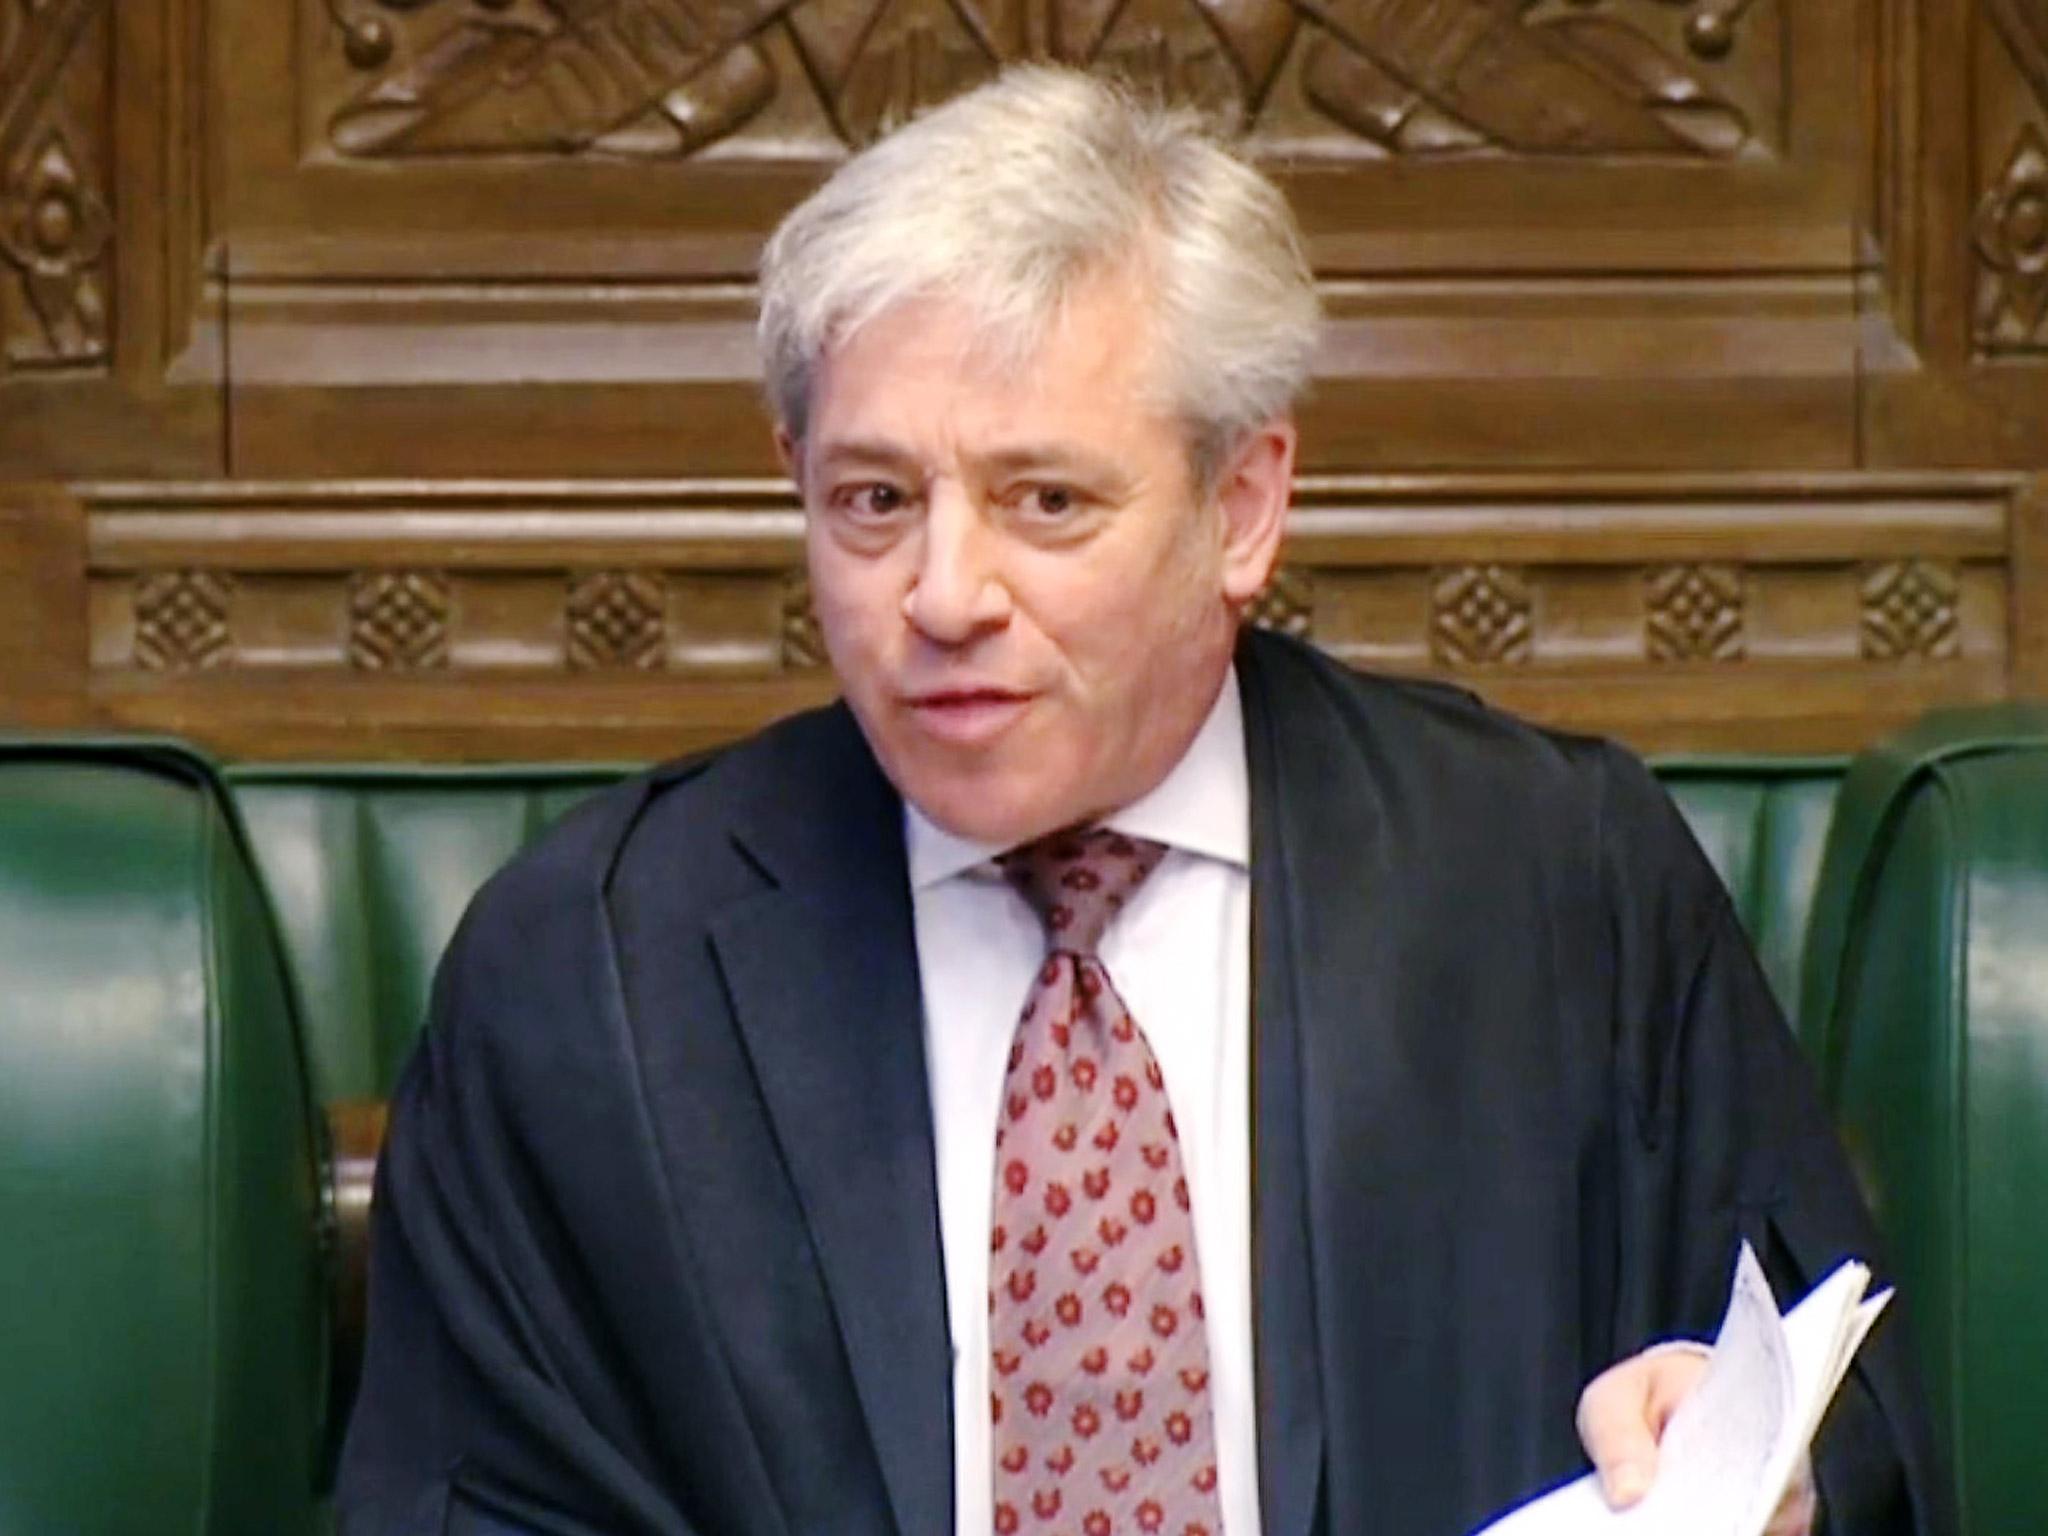 Speaker John Bercow accused of calling Andrea Leadsom a &apos;stupid woman&apos;